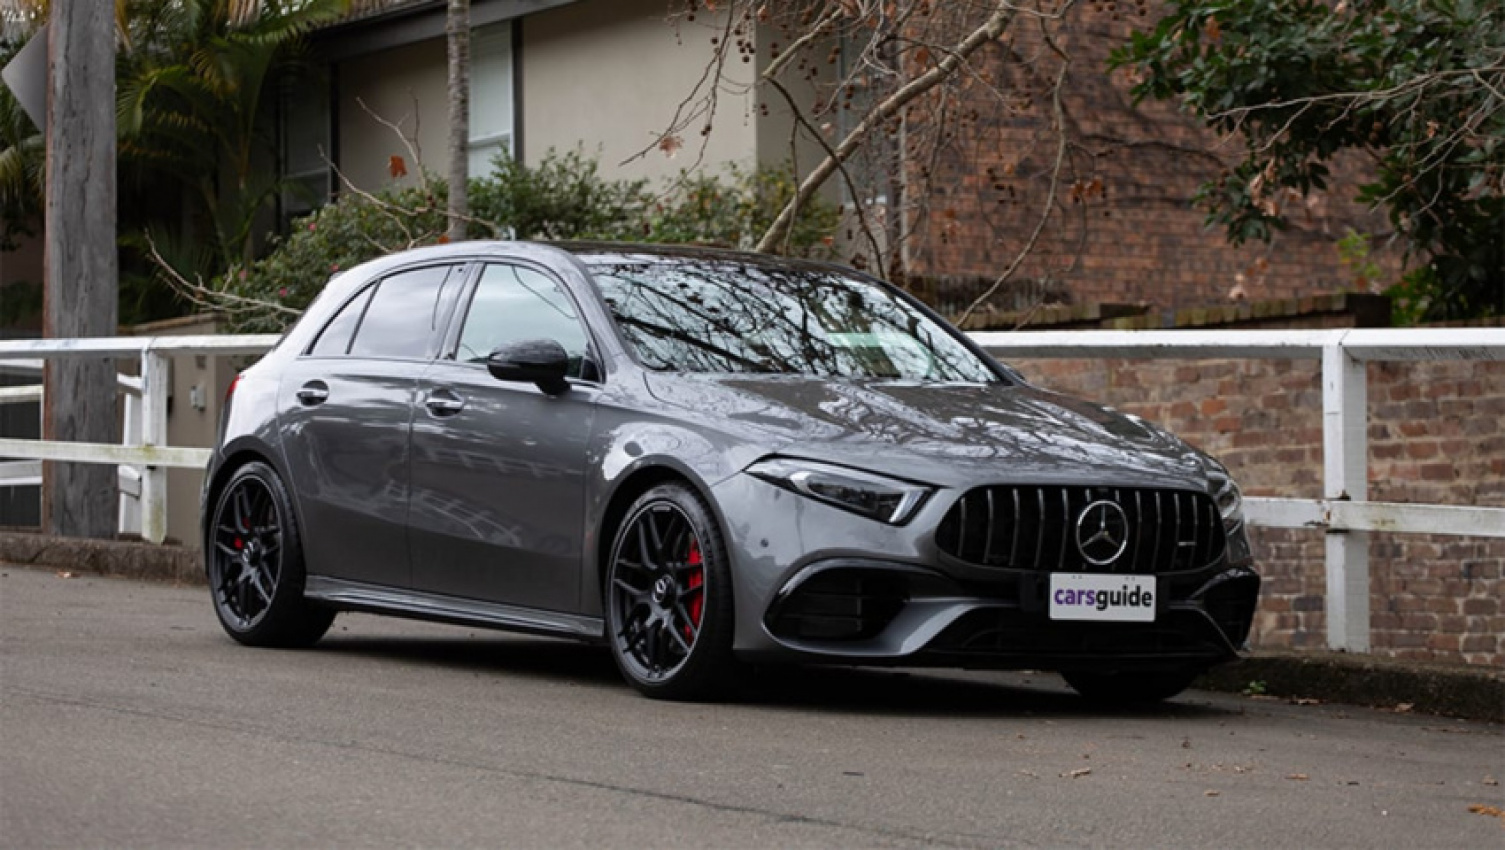 autos, cars, mercedes-benz, mg, reviews, hatchback, hot hatches, kids and cars, mercedes, mercedes amg a45, mercedes-amg a45 reviews, mercedes-benz a-class, mercedes-benz a-class 2020, mercedes-benz a-class reviews, mercedes-benz a45 2020, mercedes-benz hatchback range, mercedes-benz reviews, sports cars, android, mercedes-amg a45 s 2020 review: family test